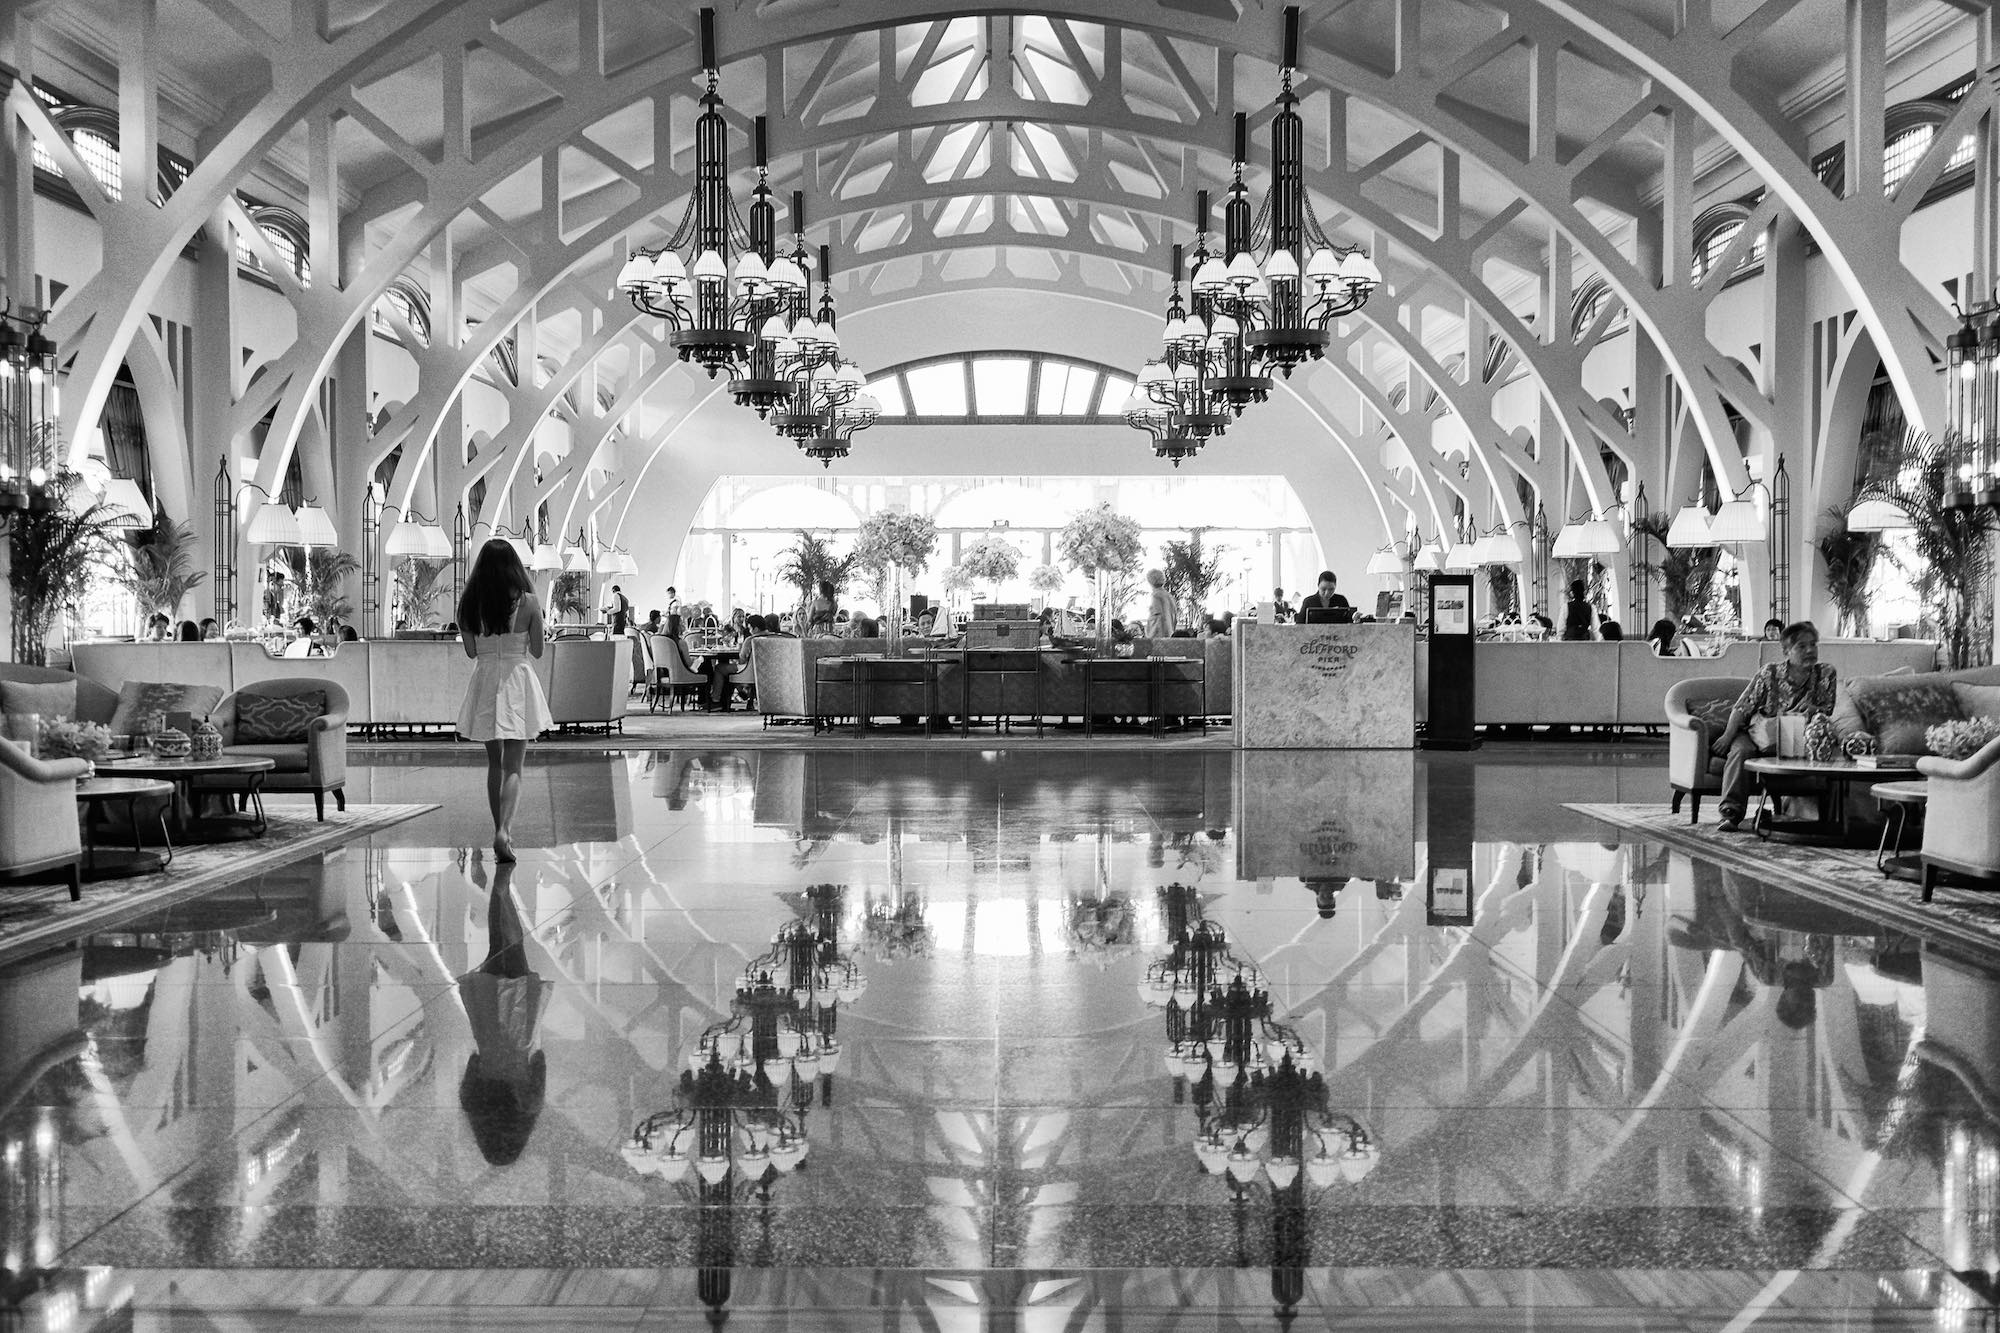 interior photography of hotel lobby by singapore photographer jose jeuland in black and white